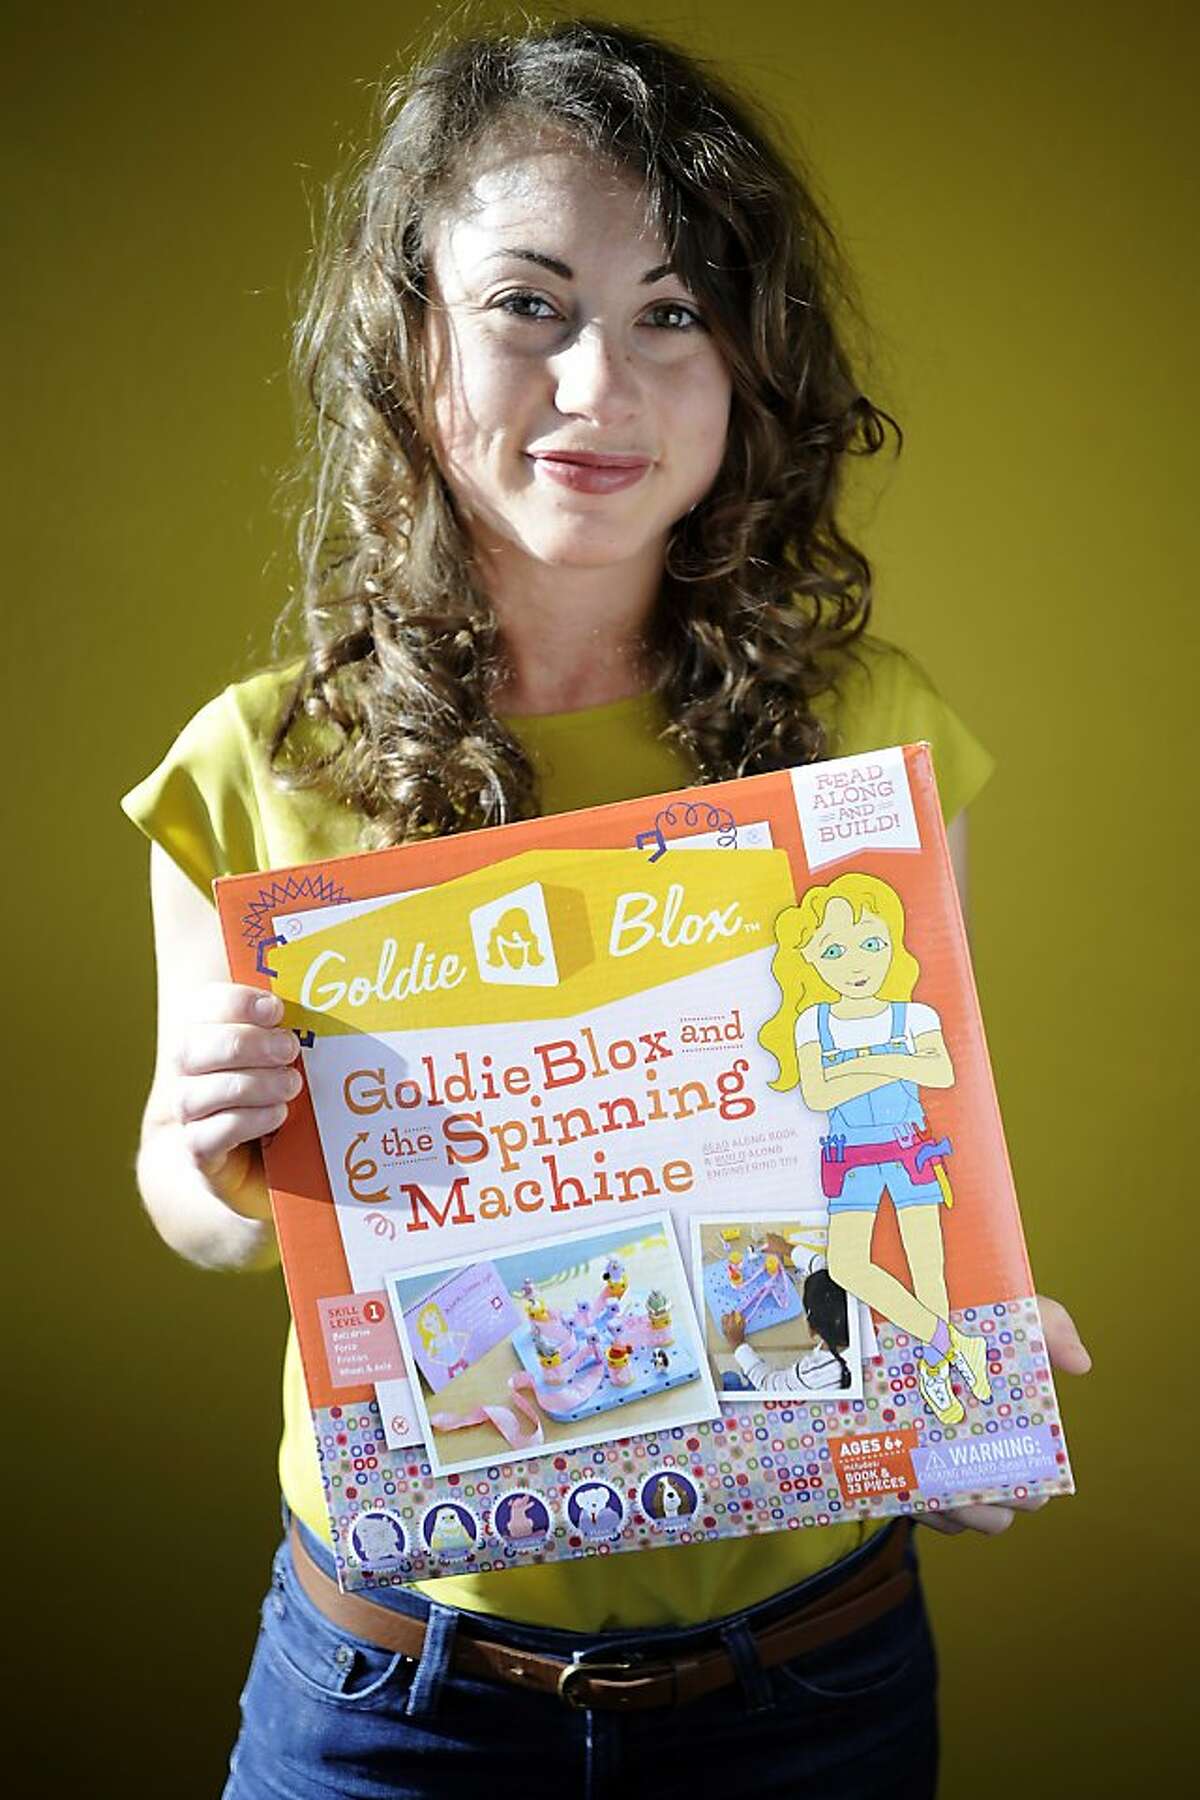 Debbie Sterling holds an example set of her toy, Goldie Blox and the Spinning Machine, at her new office space in Oakland, CA Wednesday February 6th, 2013. Stanford-educated engineer Debbie Sterling has created Goldie Blox, a construction toy and book series with character figurines, to help girls realize that science and engineering are fun.